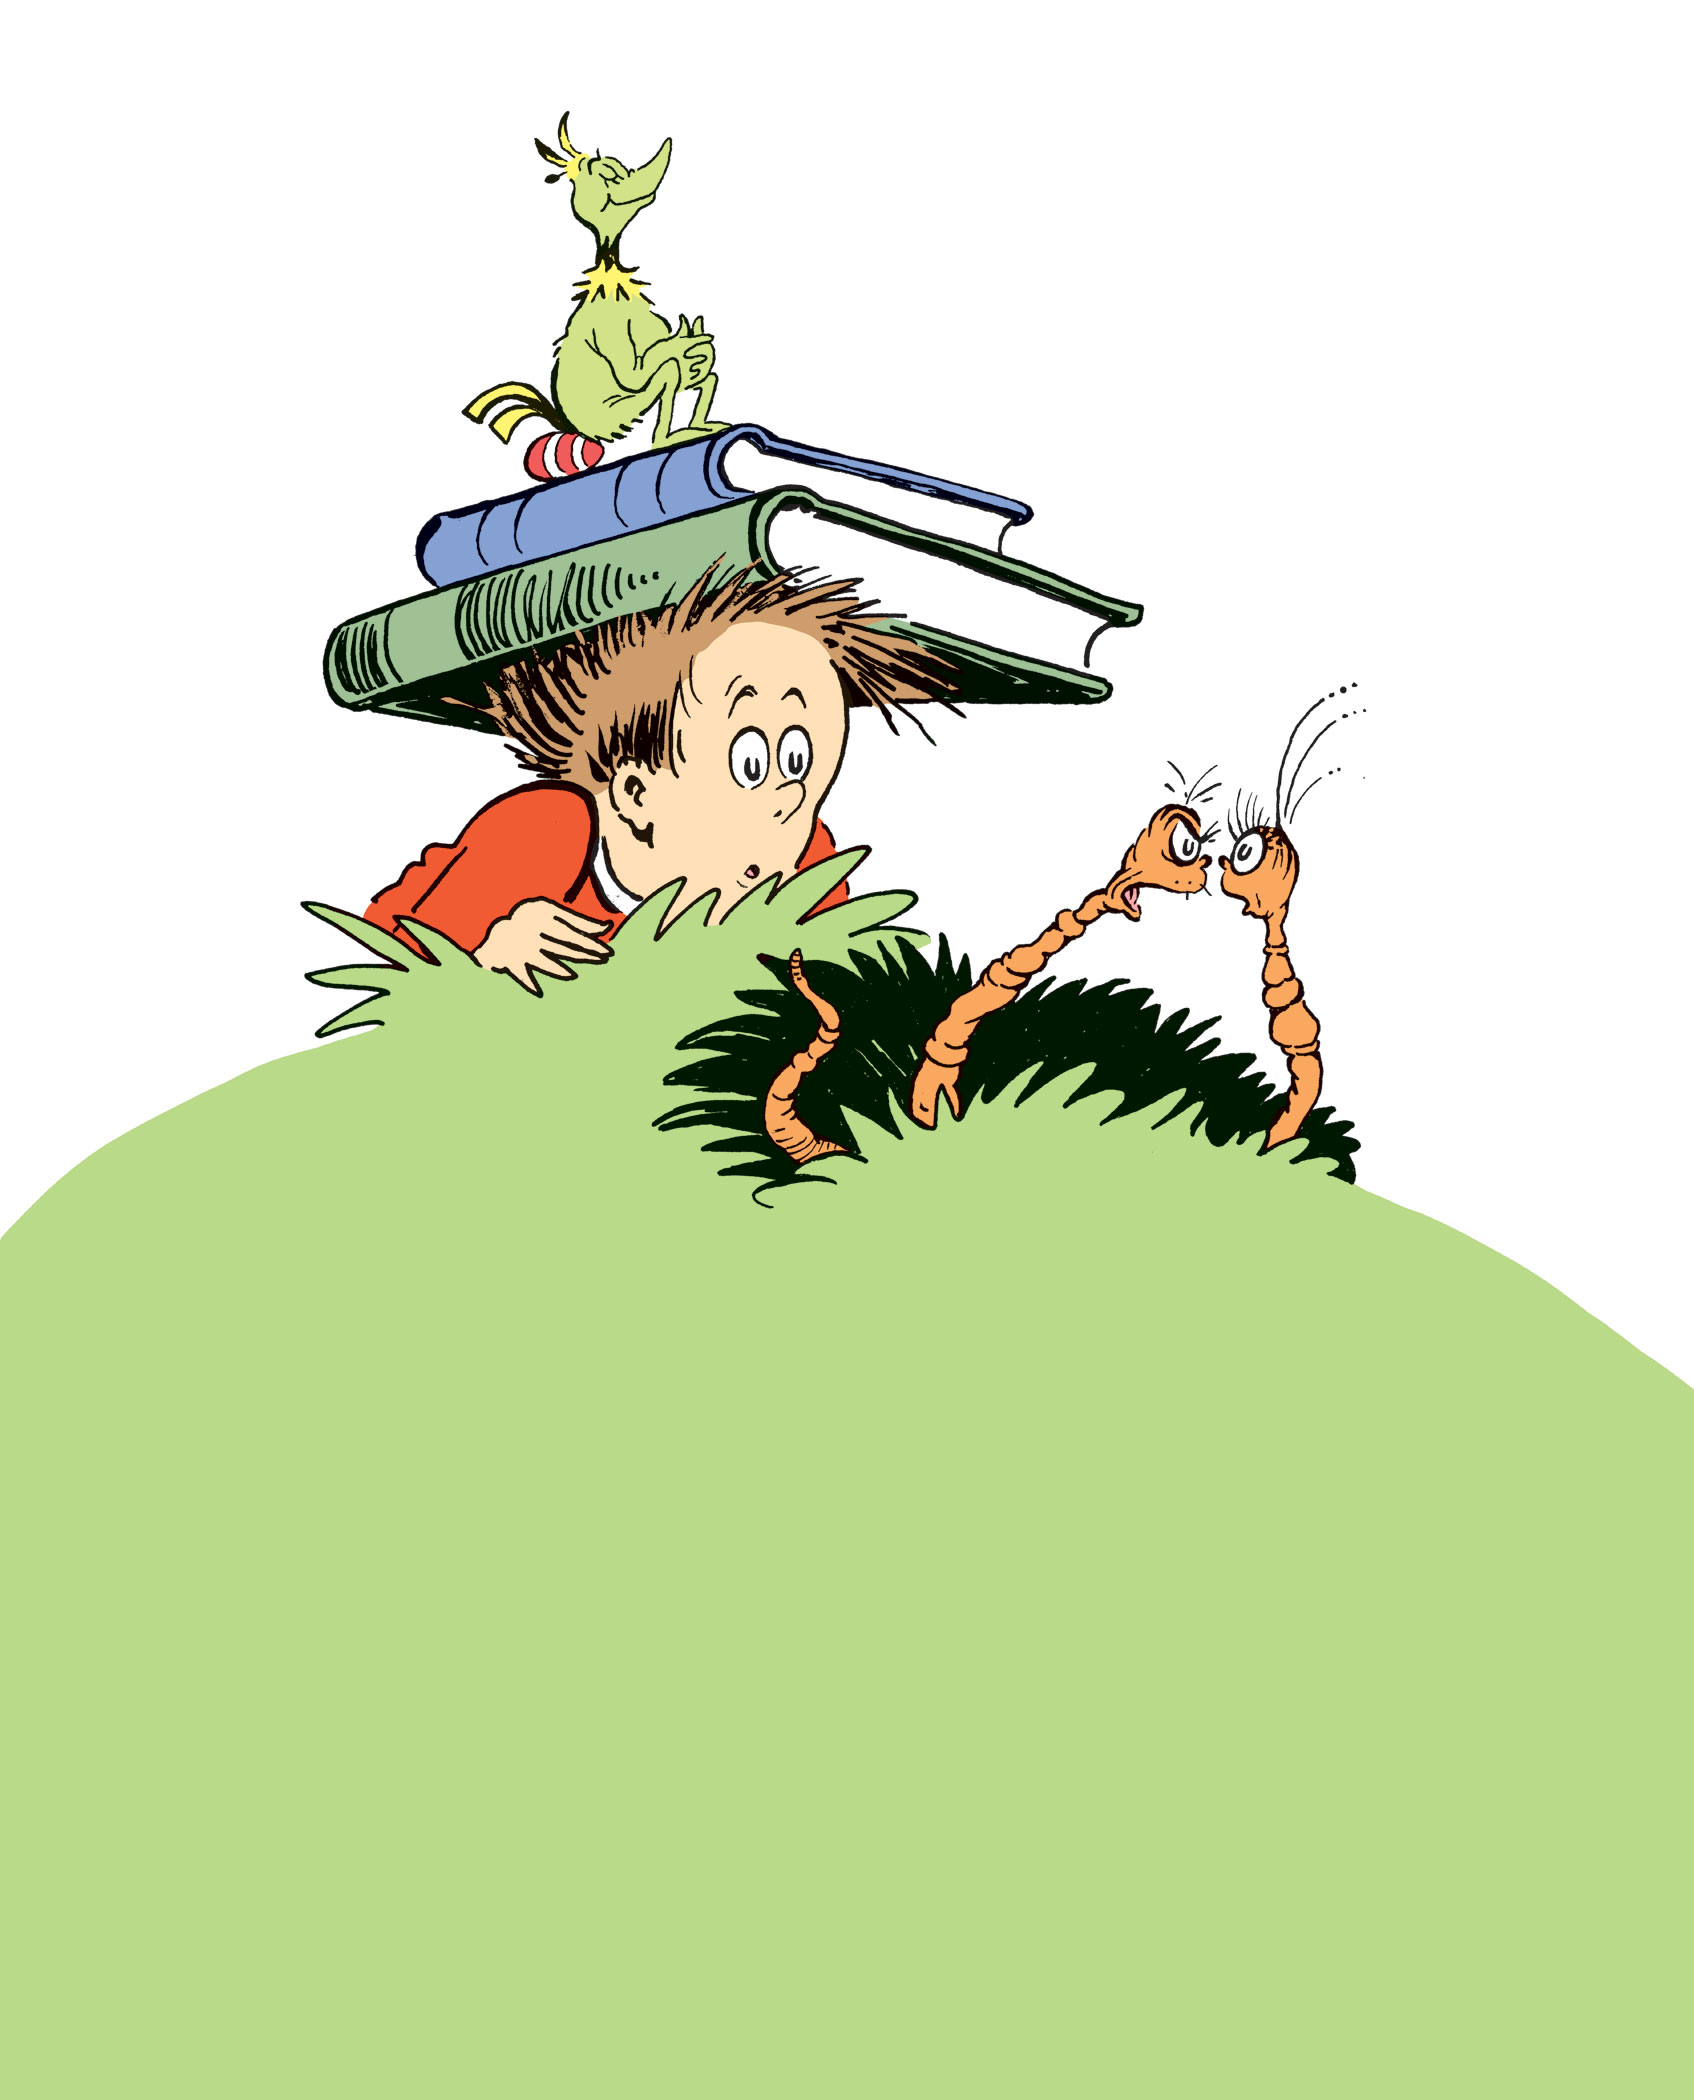 Marco in an illustration from <i>Horton and the Kwuggerbug and More Lost Stories</i> by Dr. Seuss (Courtesy of Random House)